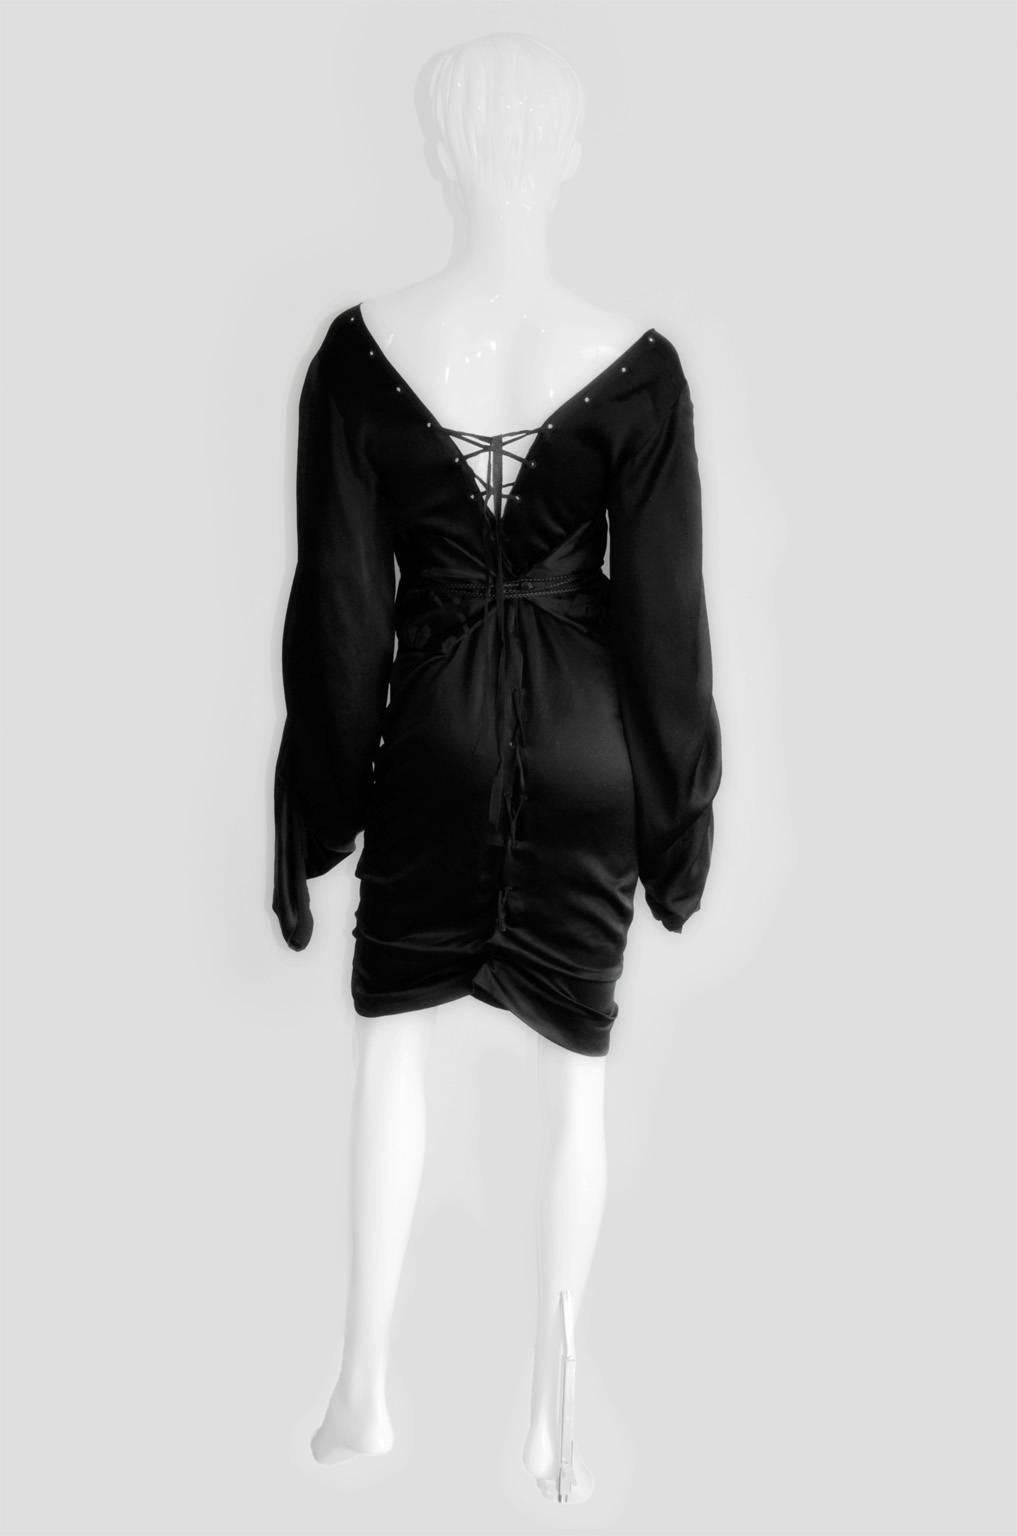 Heavenly Tom Ford Gucci FW 2002 Gothic Collection Black Silk Runway Dress & Obi In Excellent Condition In Melbourne, AU